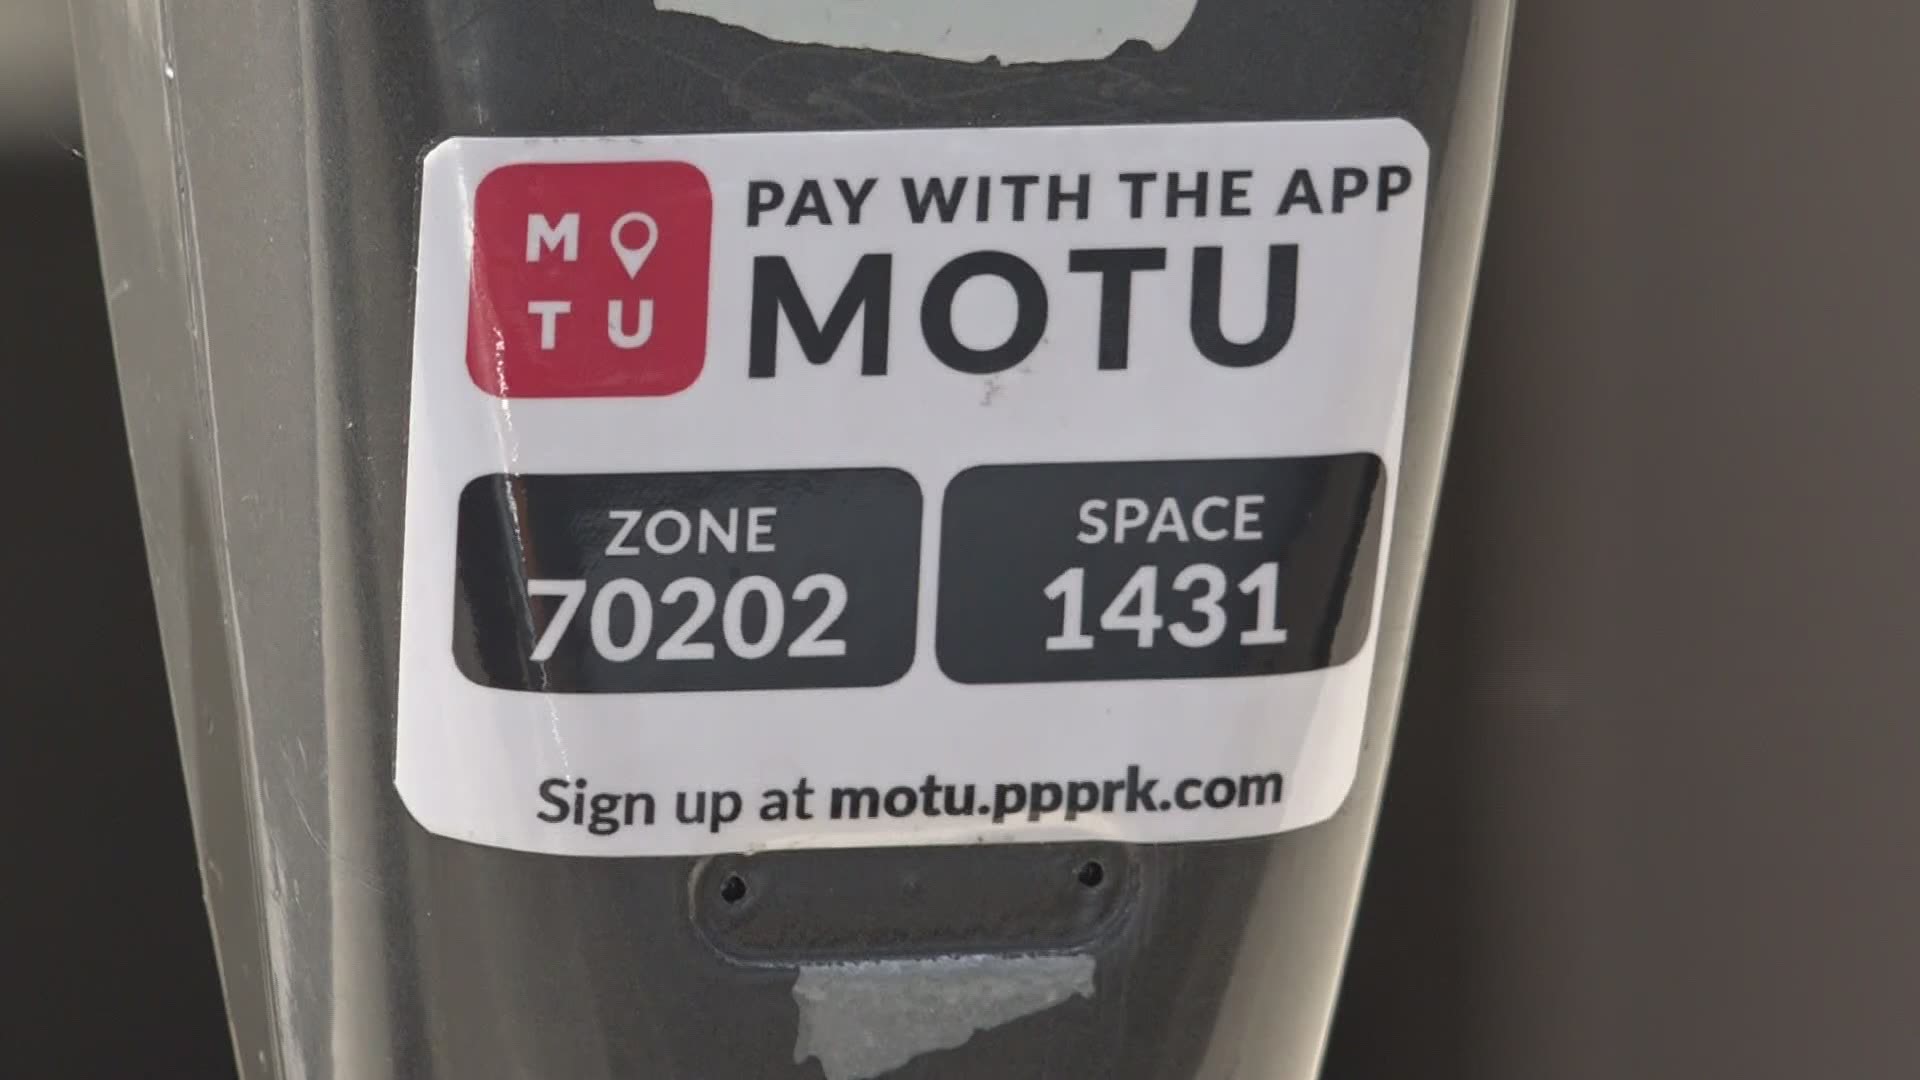 In an effort to boost economic recovery, the city will be providing Motu parking validations to local businesses upon request.